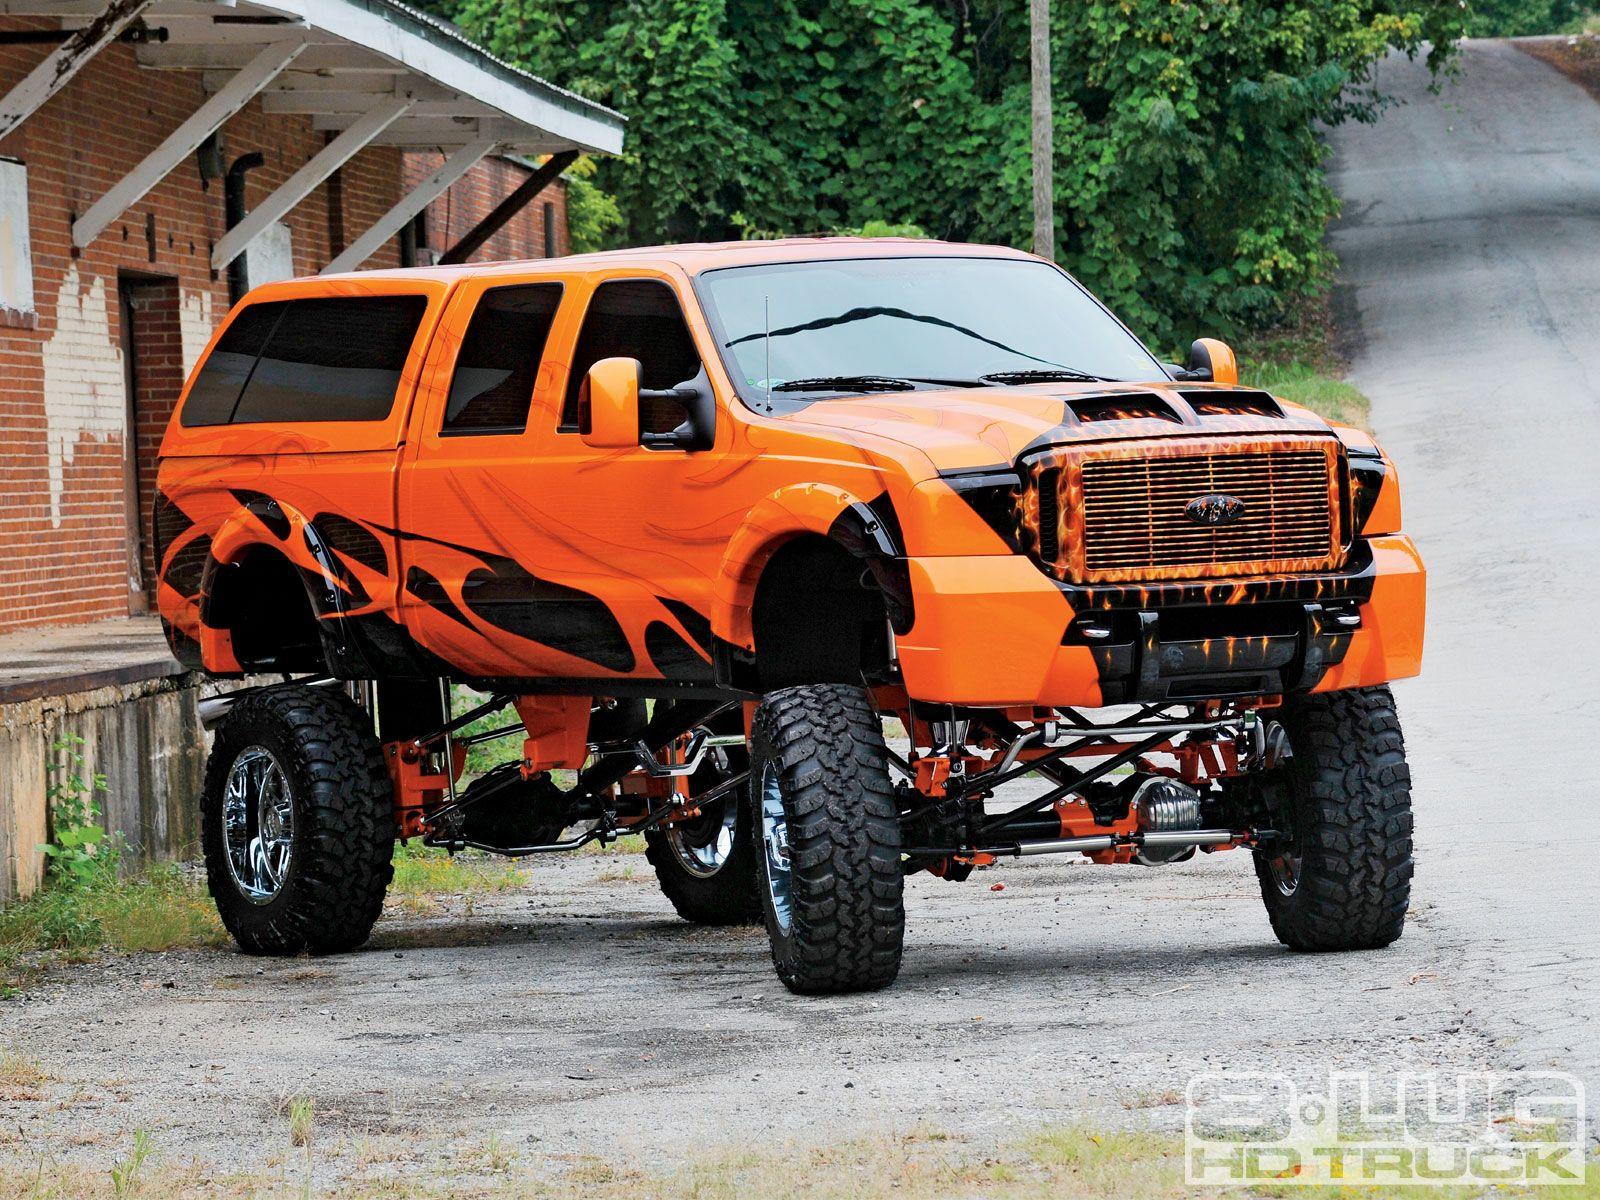 Best Ford F 350 Lifted Trucks Image. Lifted